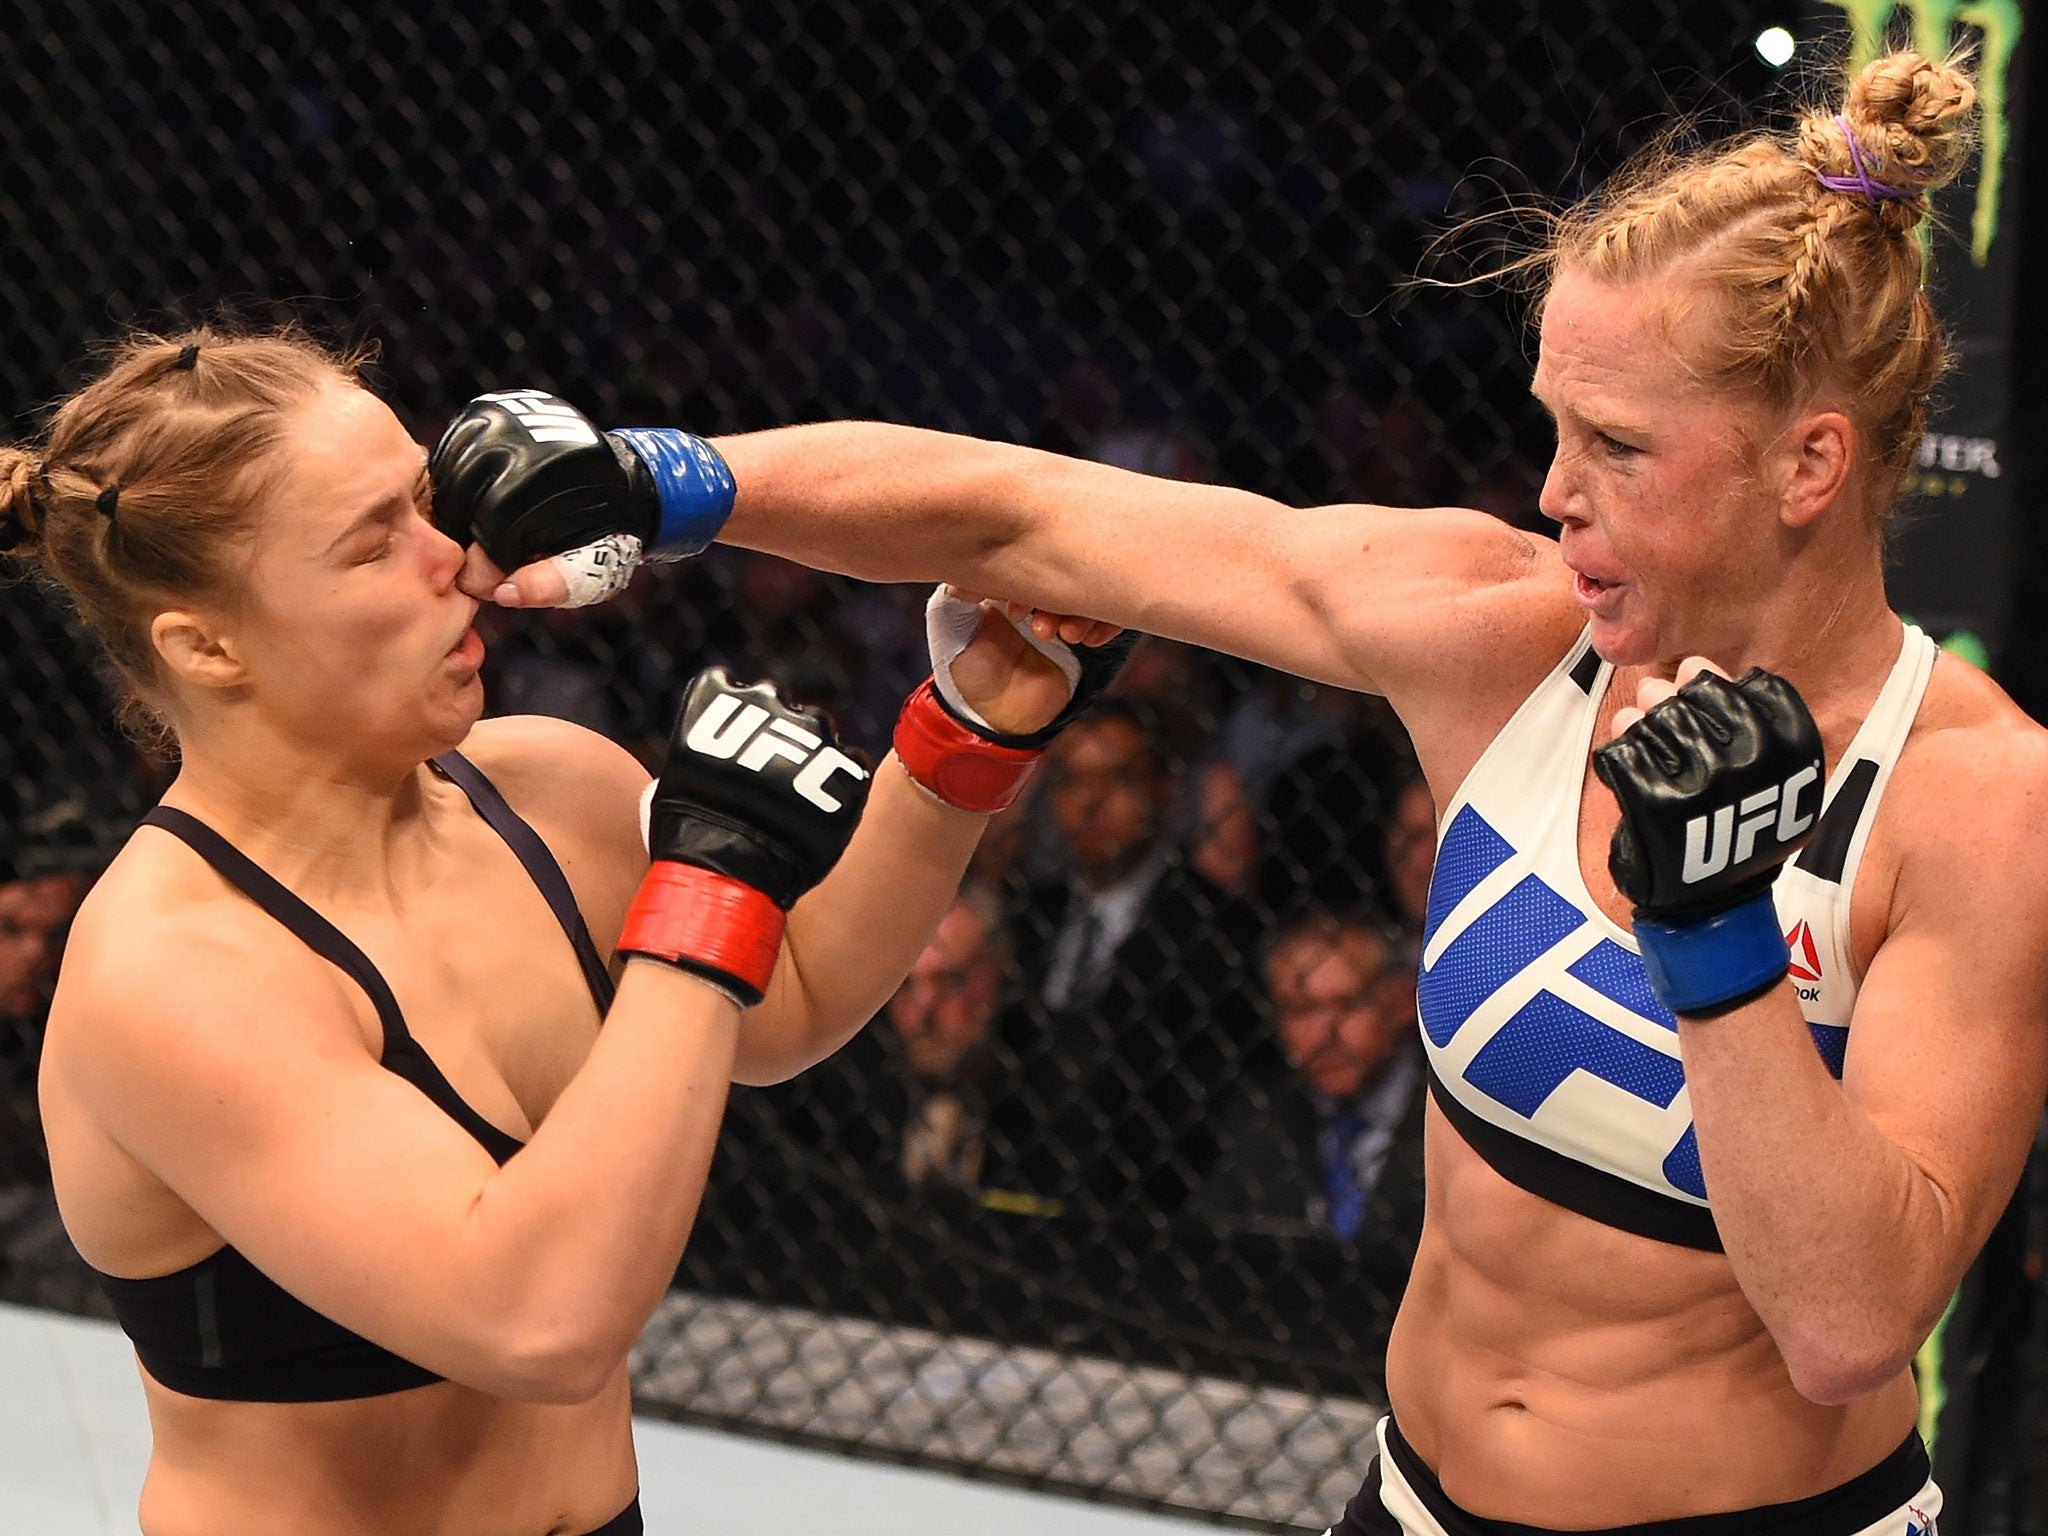 Holly Holm beat Ronda Rousey to win the women's bantamwieght championship